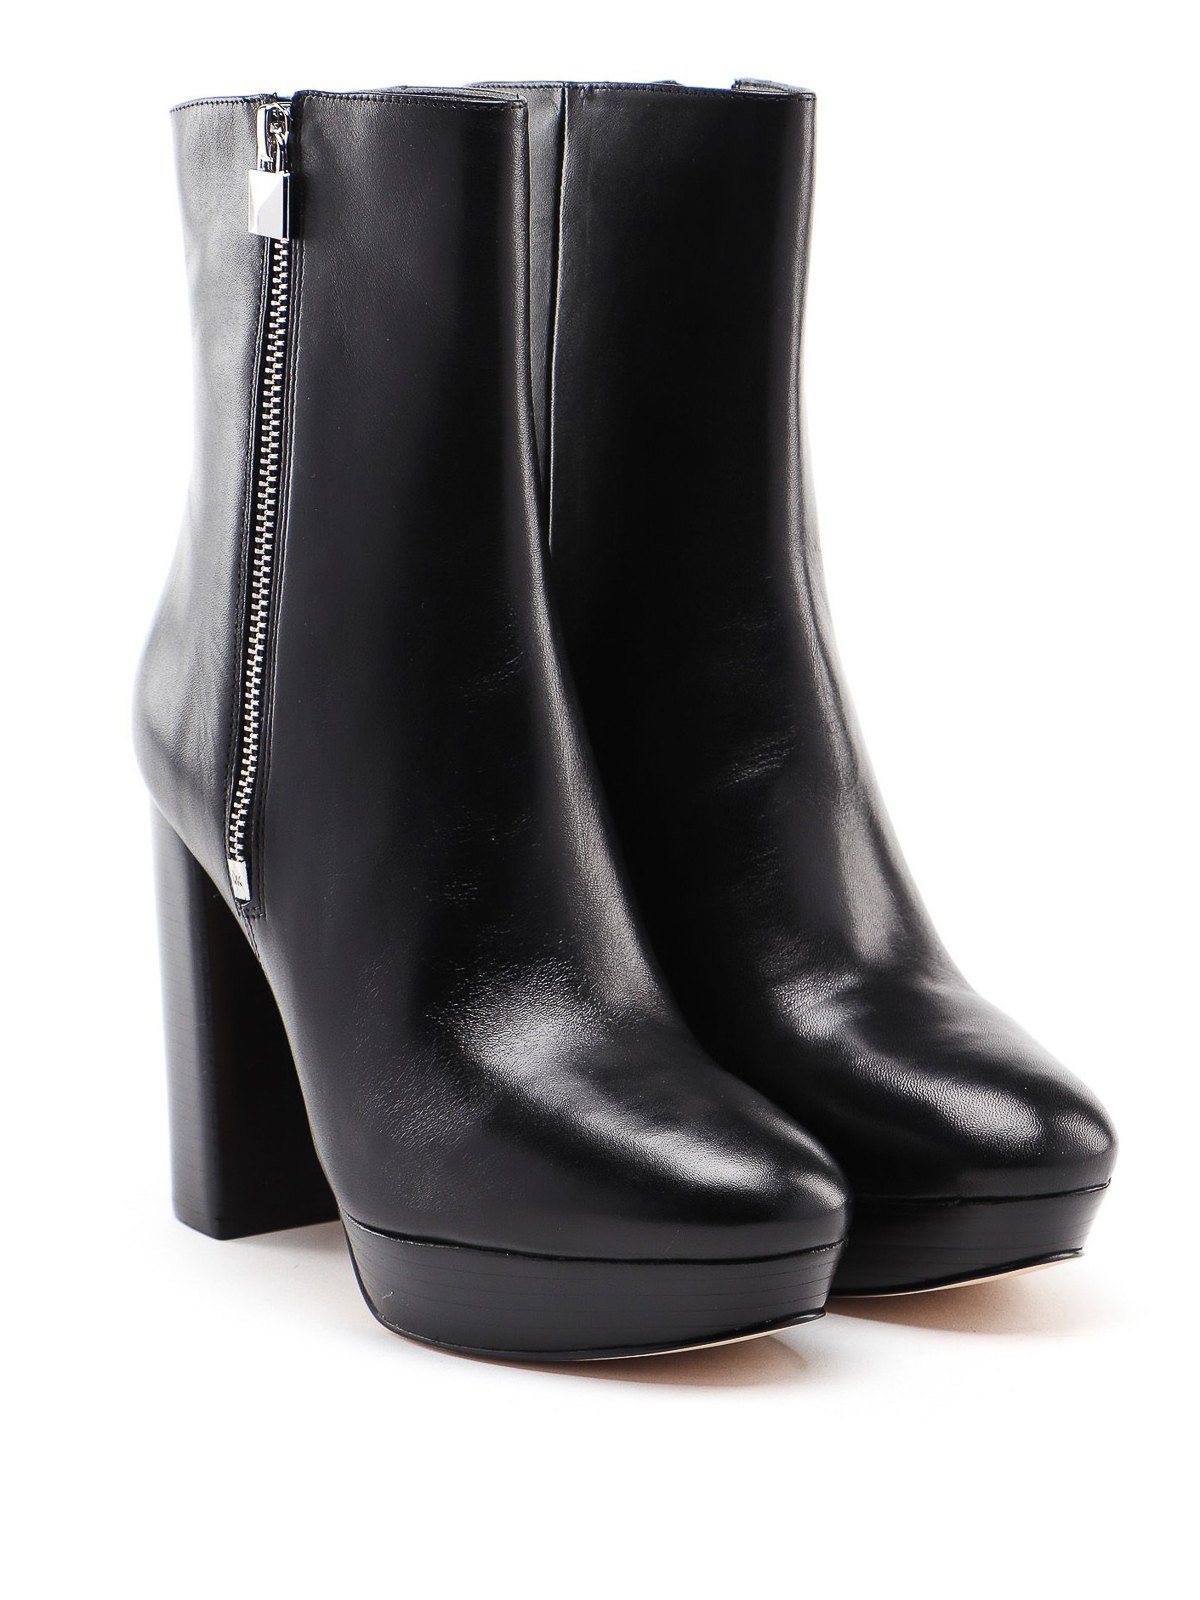 Michael Kors - Frenchie leather booties 